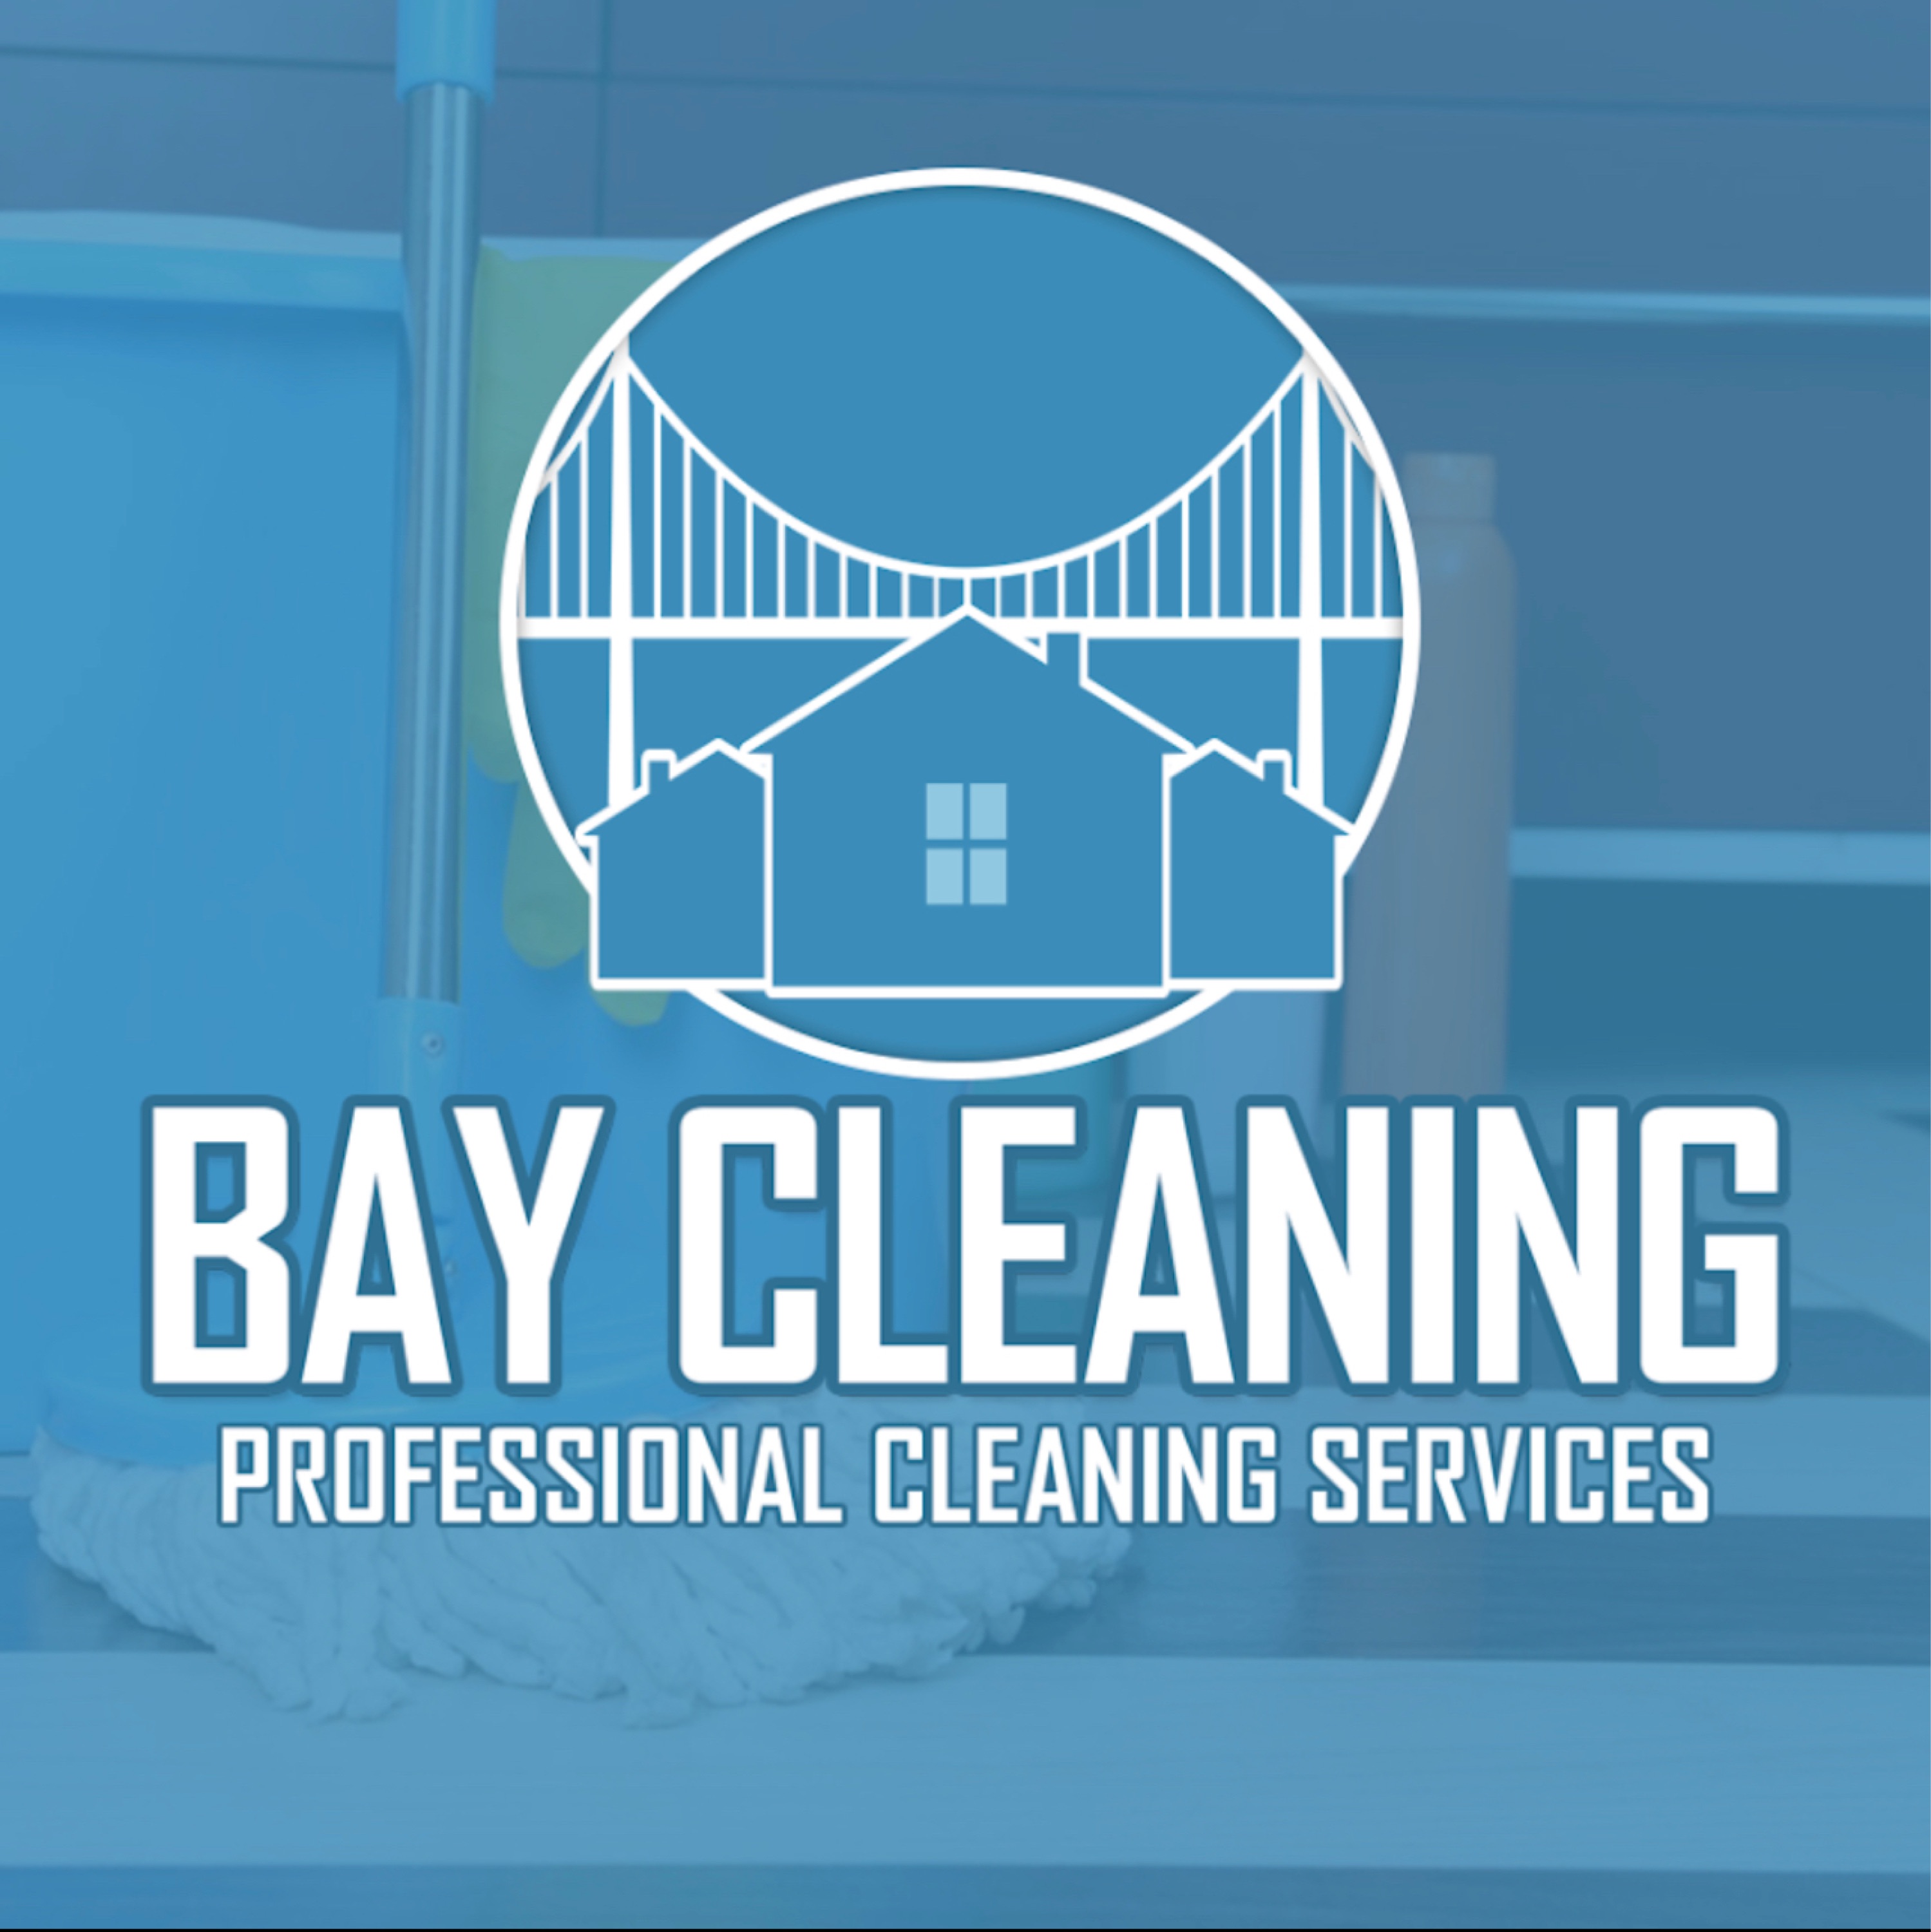 Bay Cleaning Service Logo